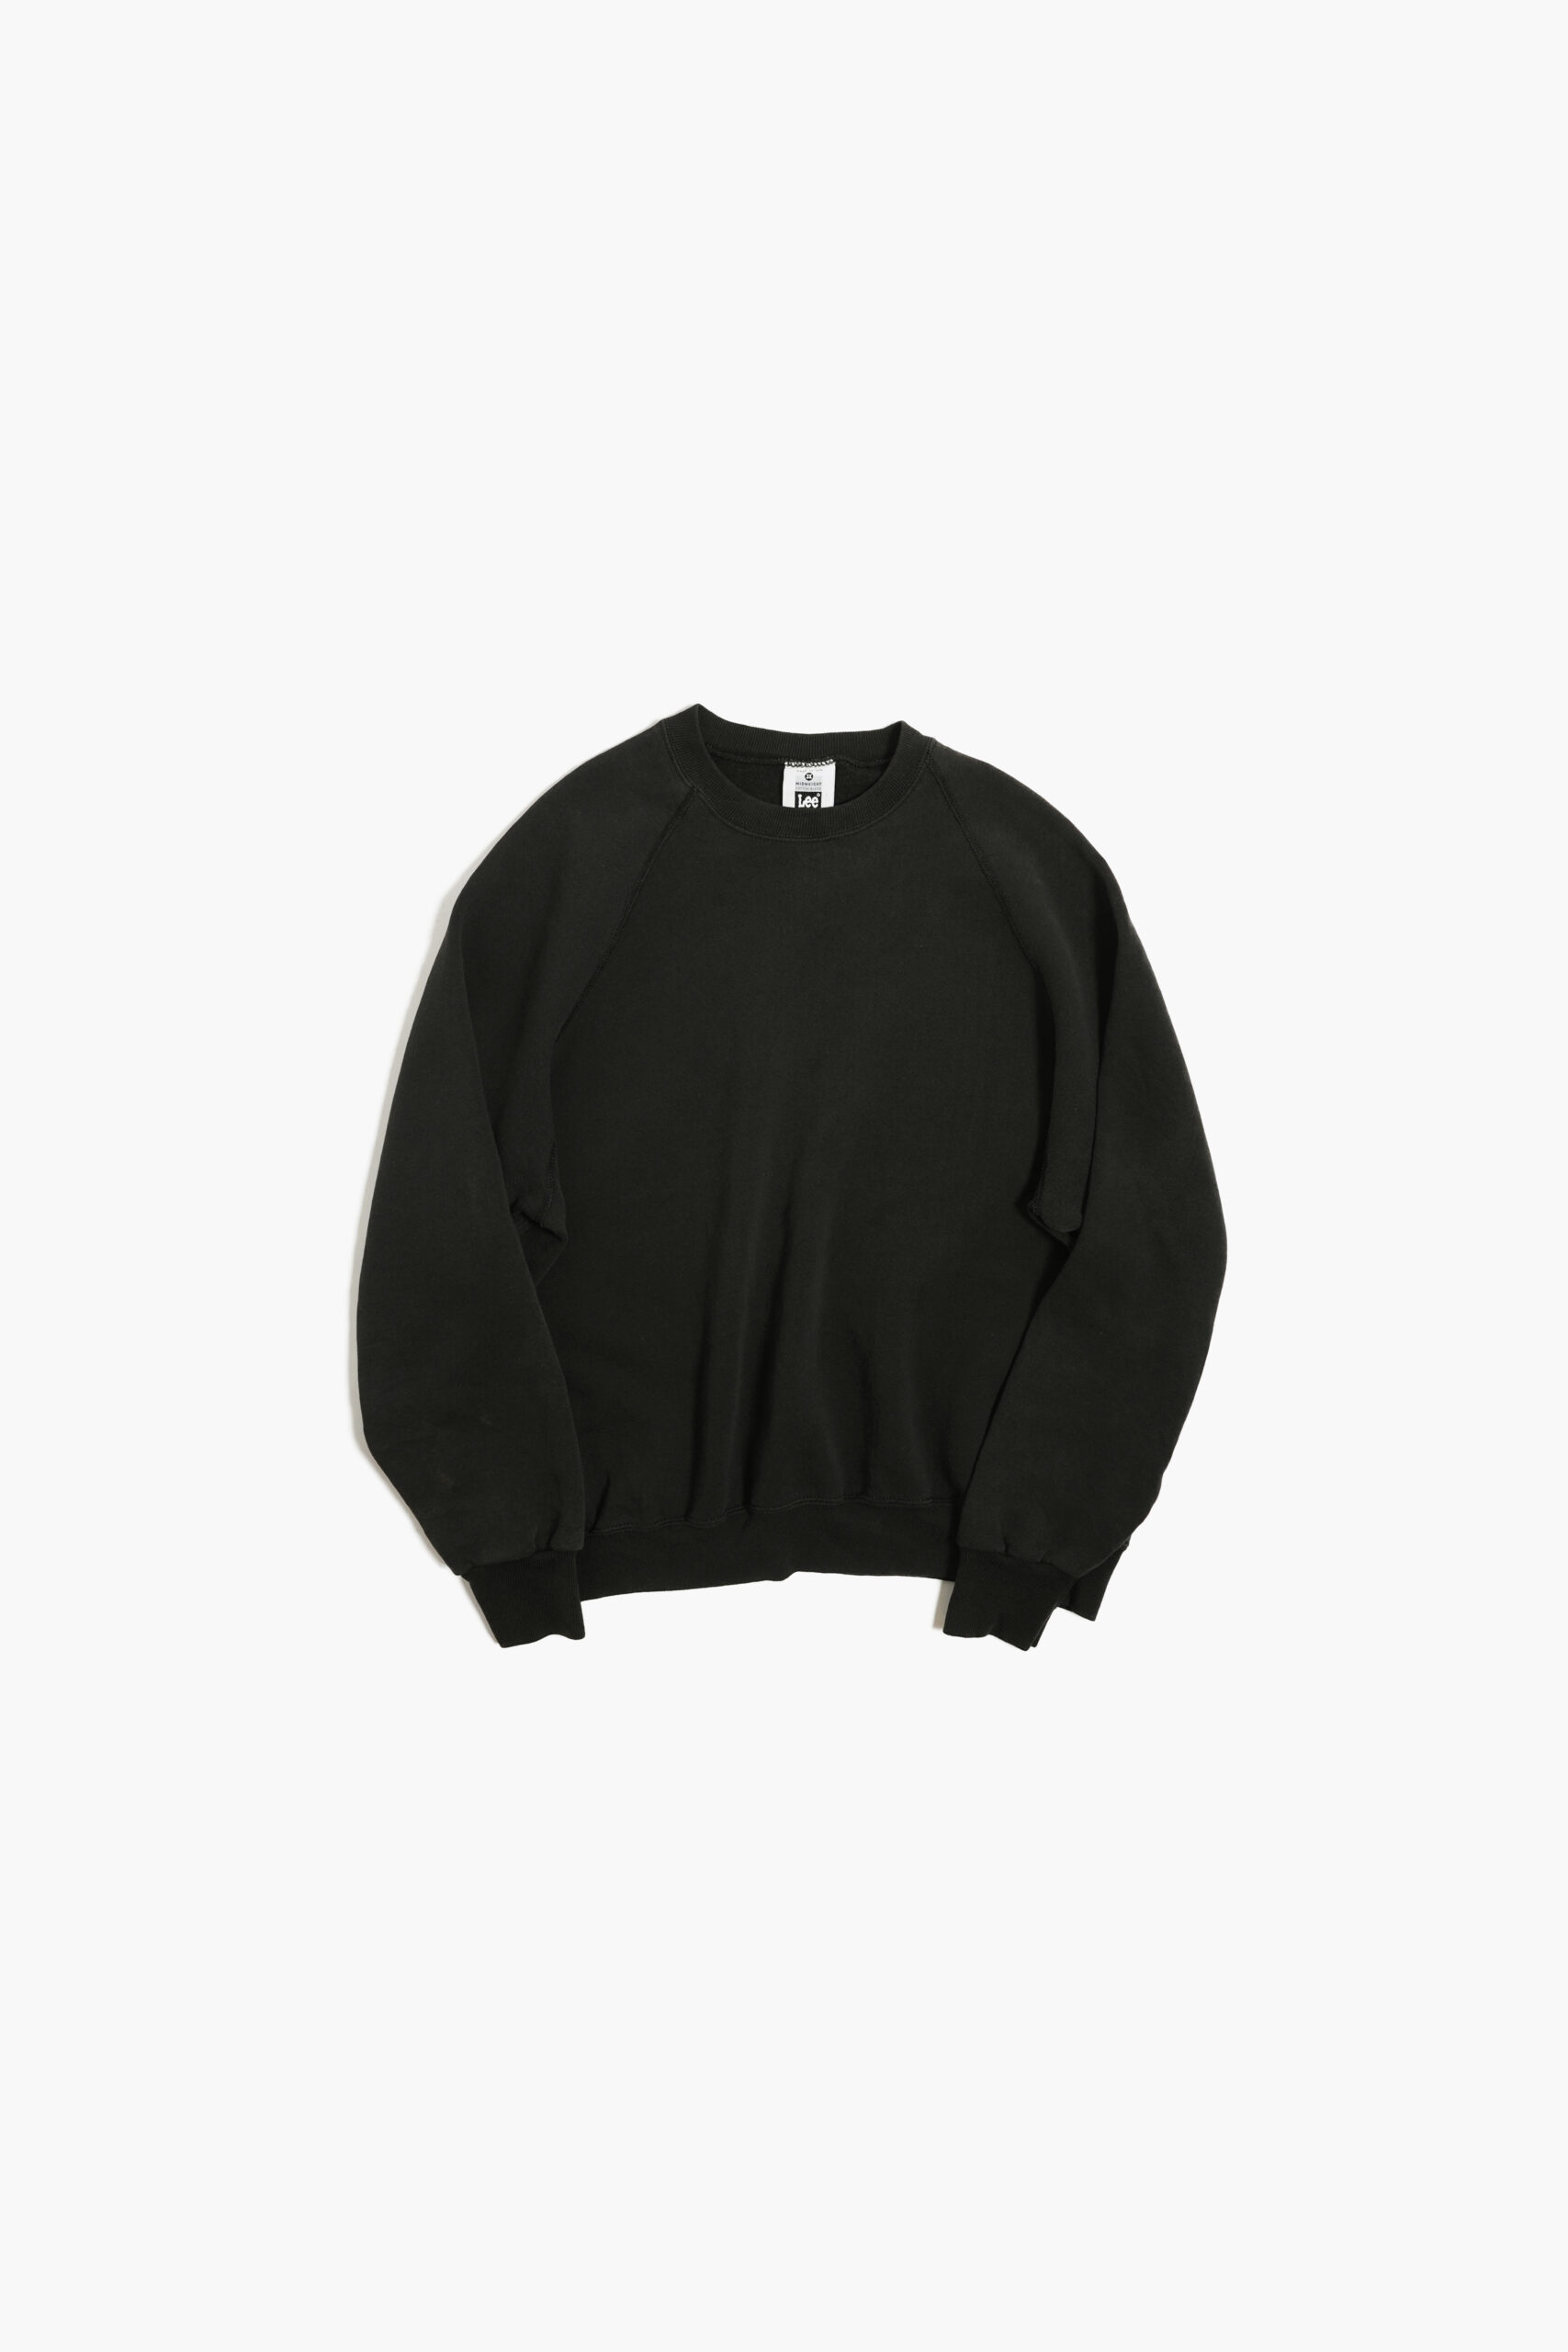 90'S LEE MADE IN USA FADE BLACK COLOR SWEAT